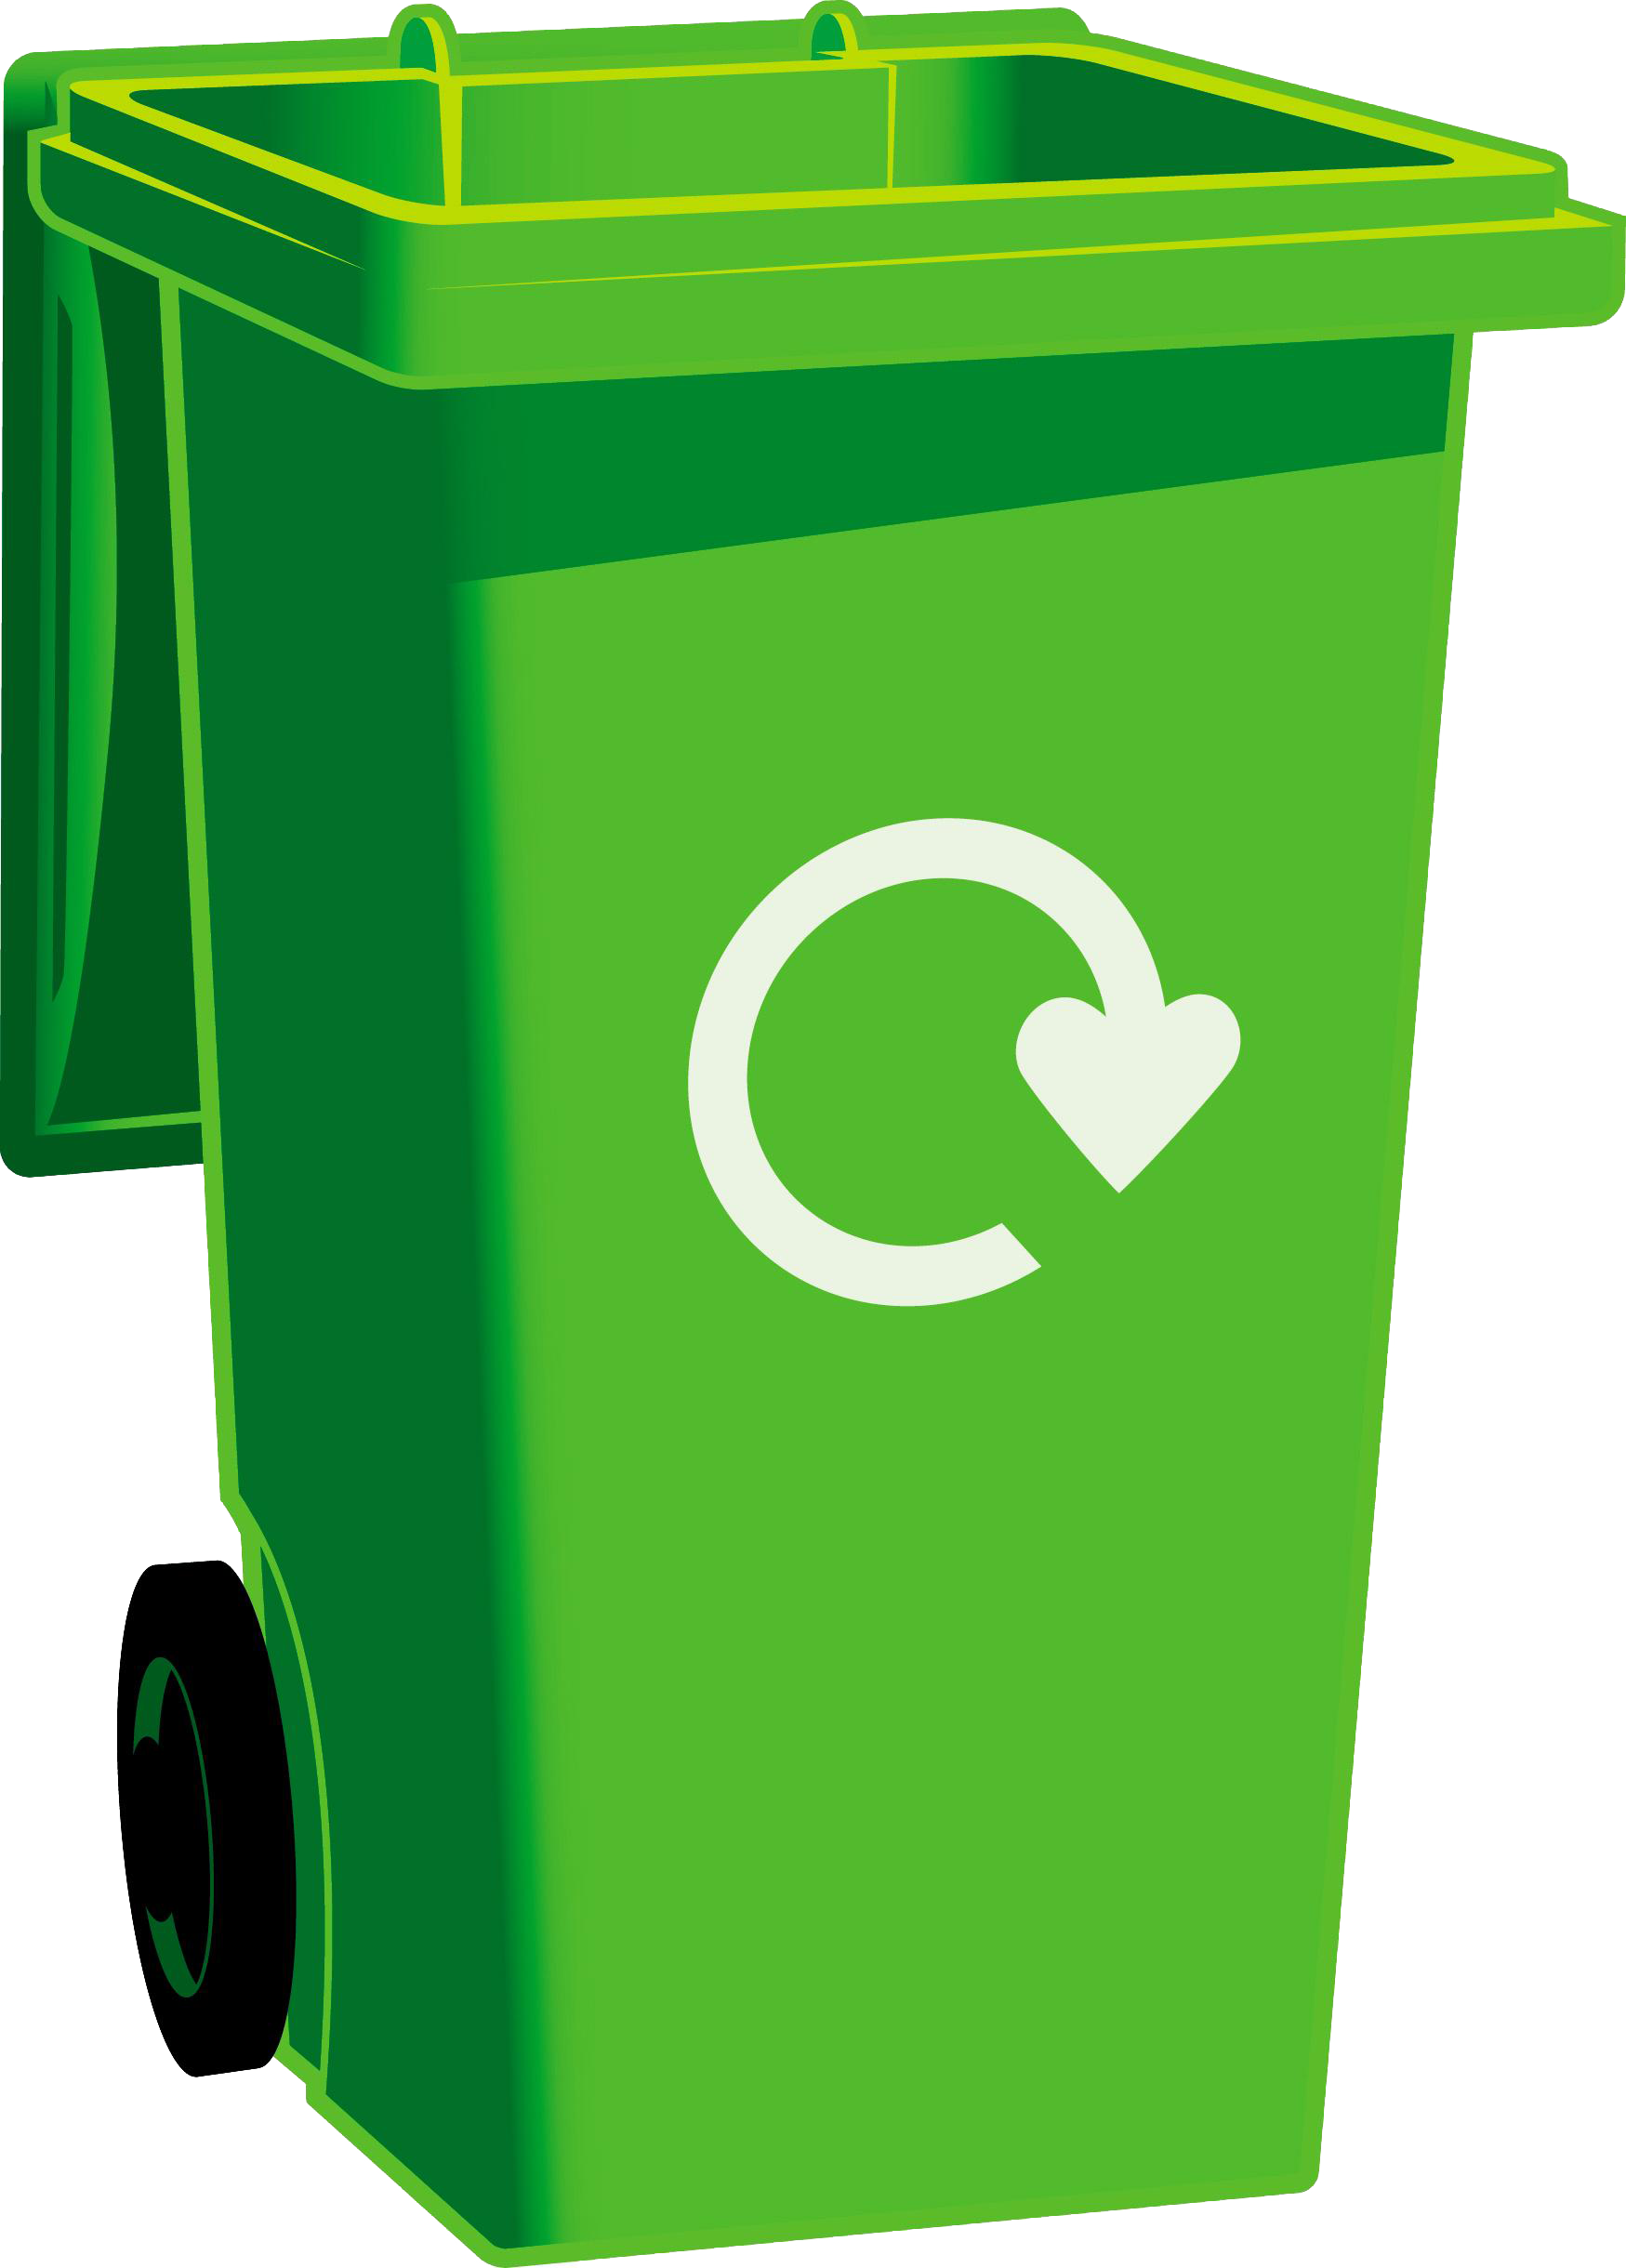 Download Bin Recycling Baskets Paper Green Rubbish Recycle Hq Png Image